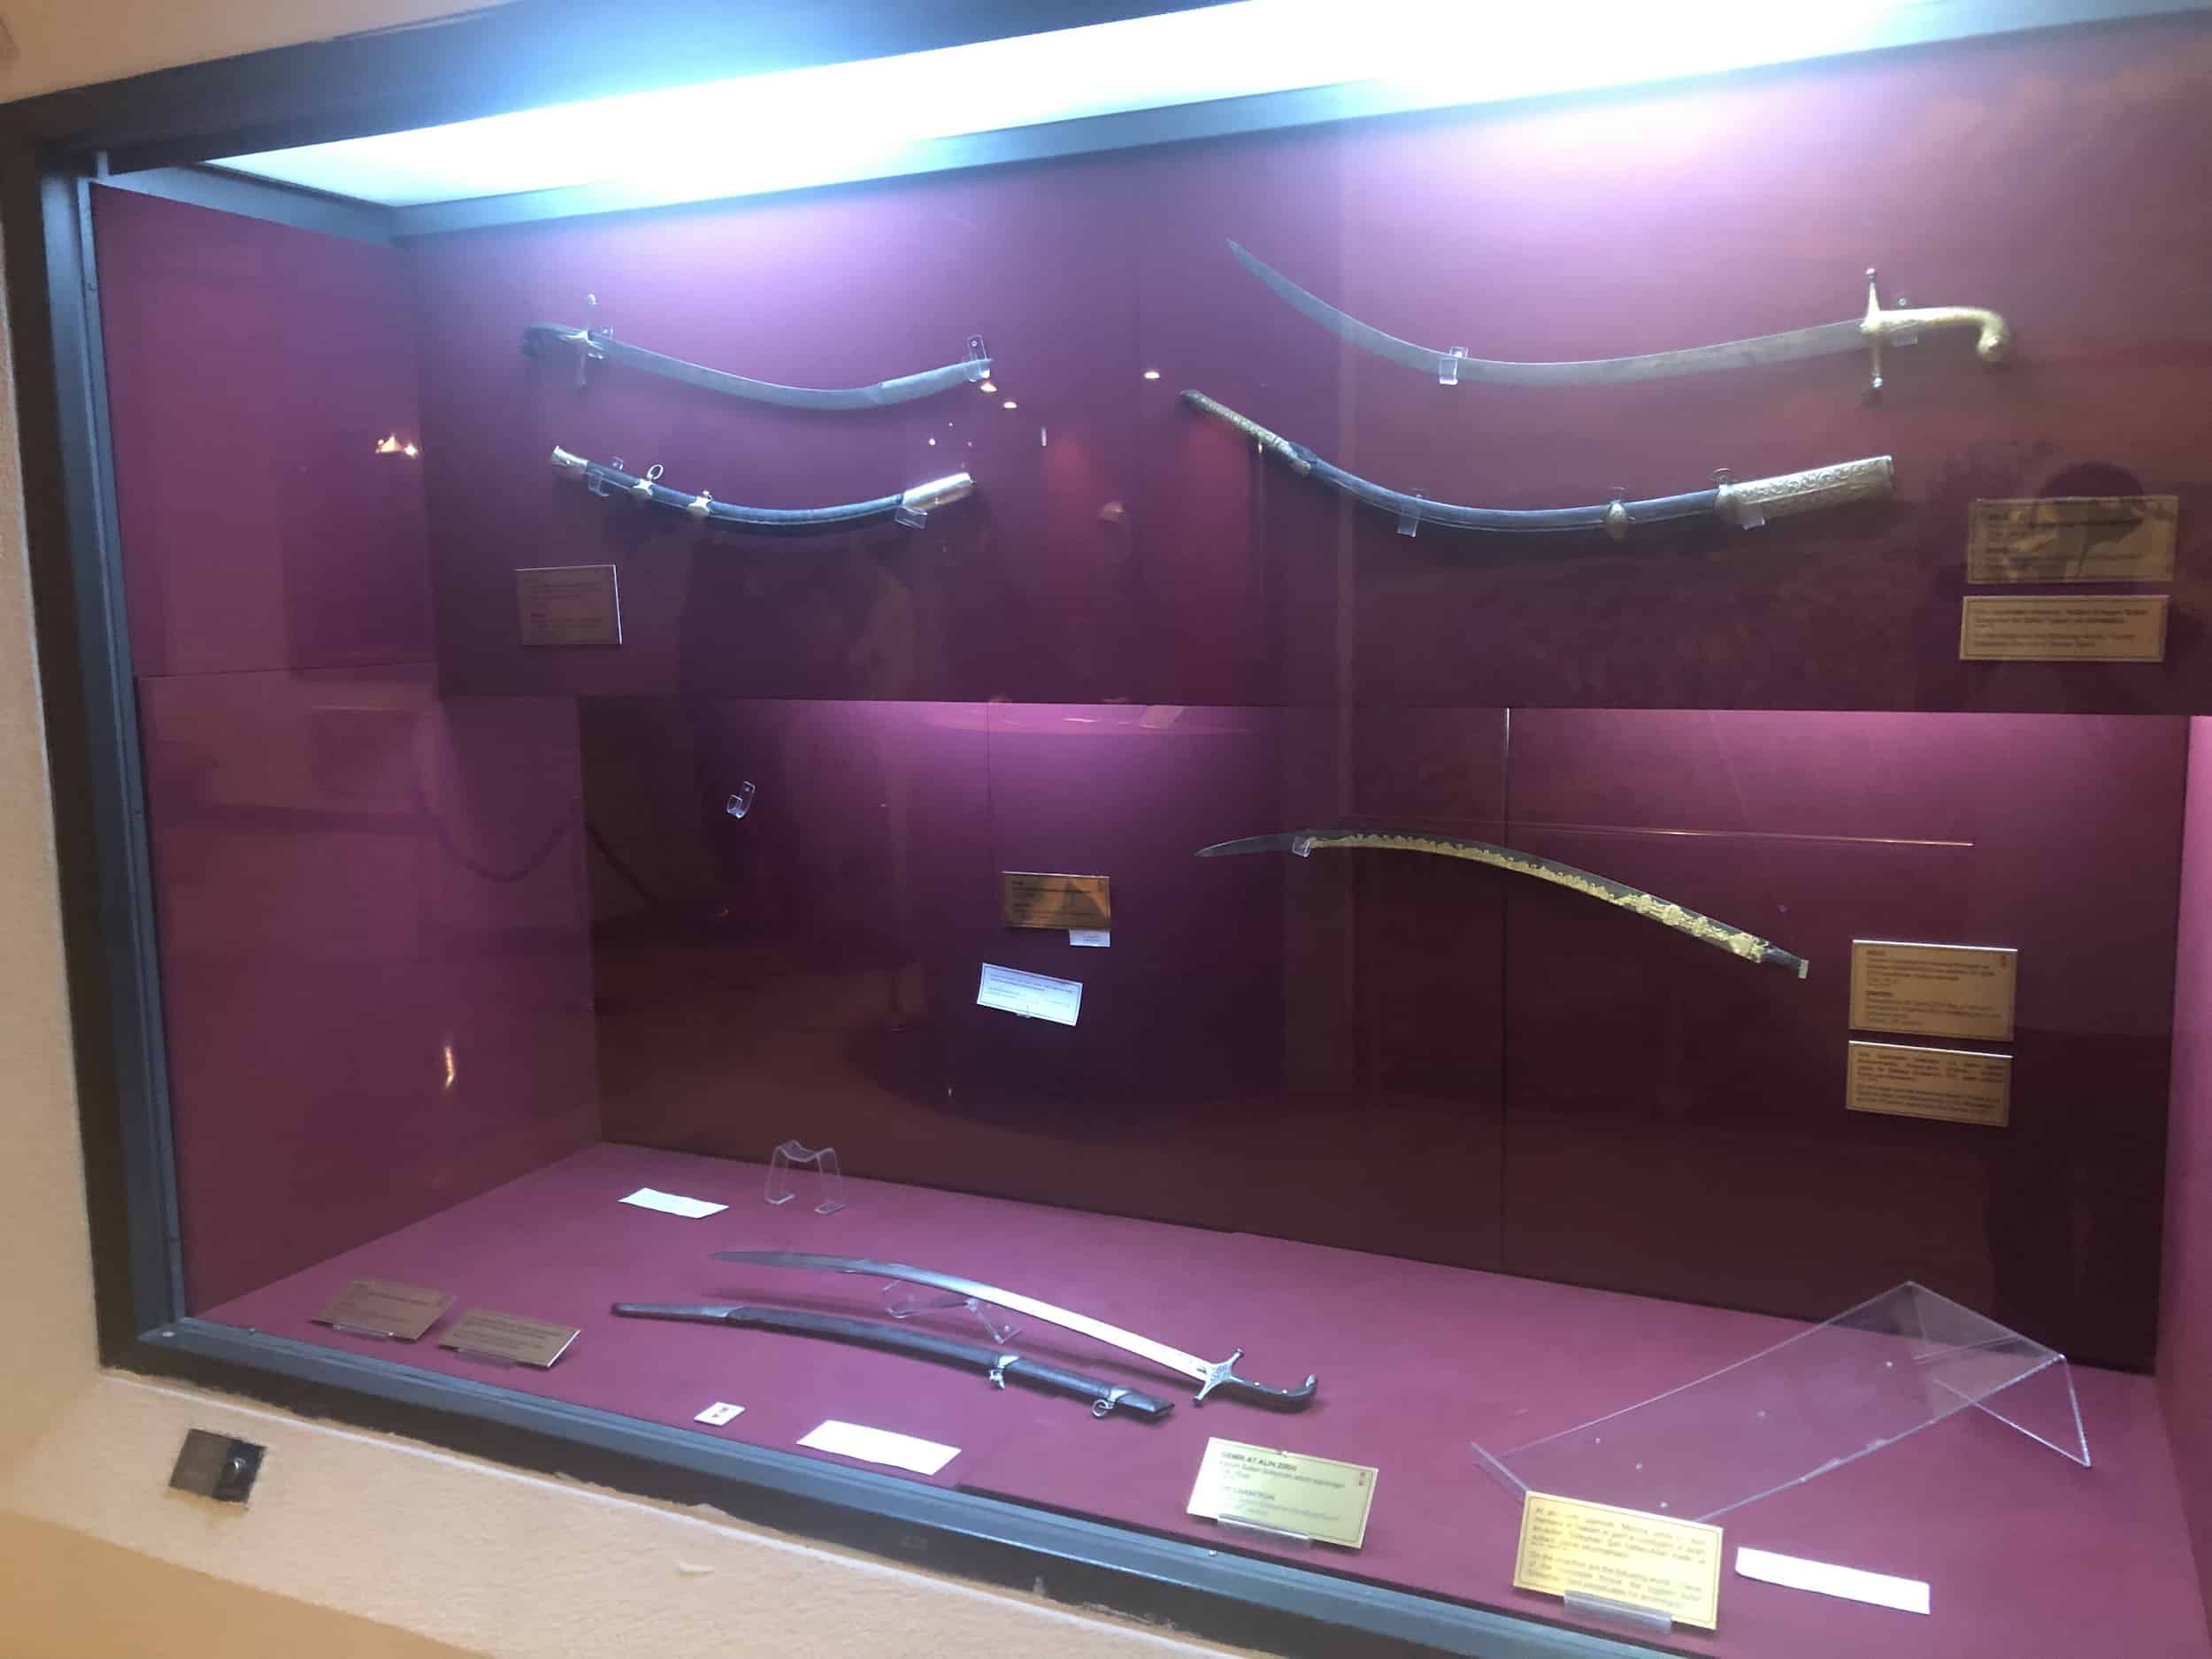 Swords and sheaths belonging to Ottoman sultans in the Ottoman Rising Period Hall